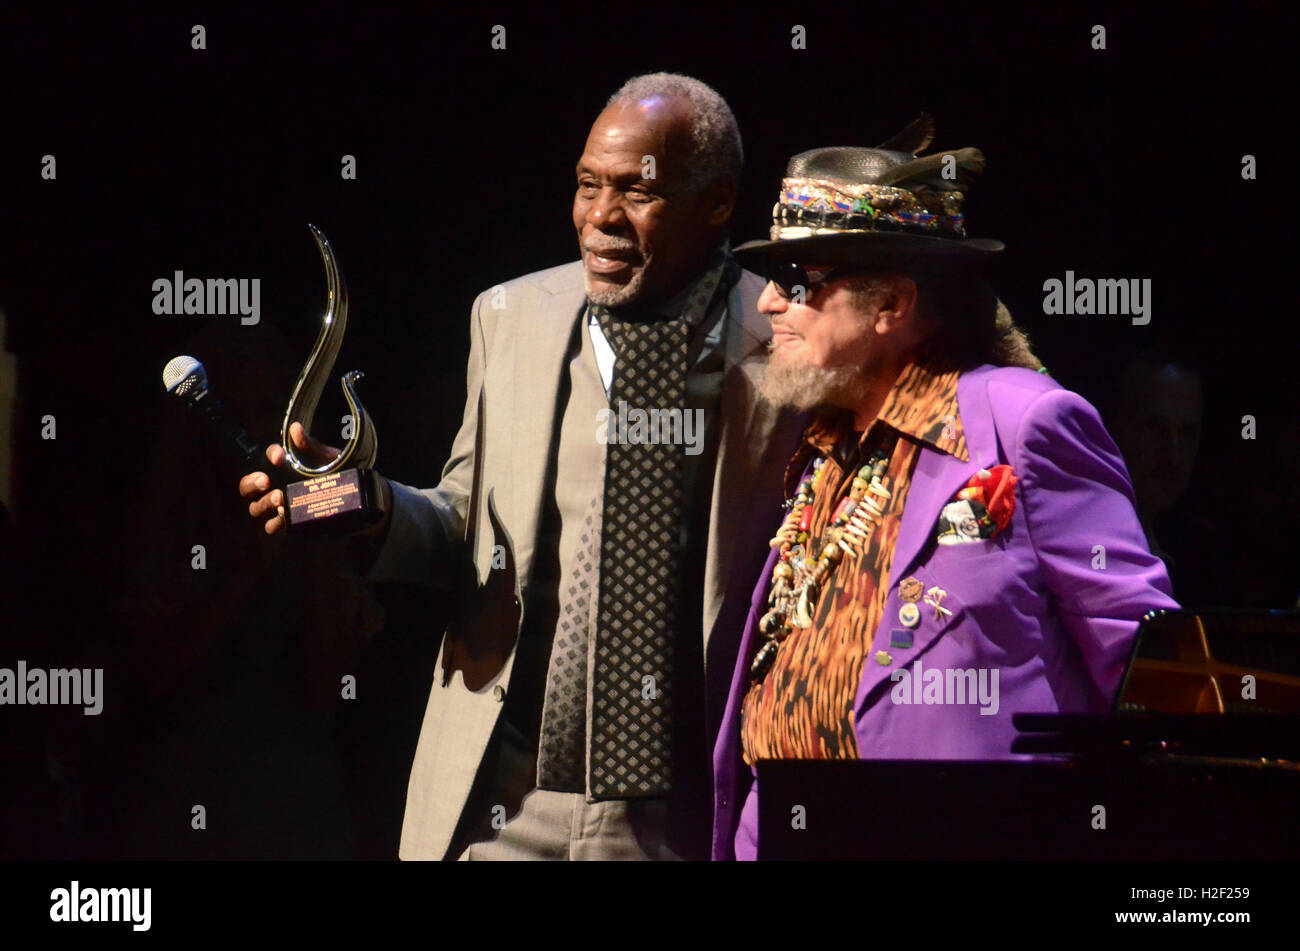 Harlem, NY, USA. 27th Oct, 2016. Dr. John receives the Hank Jones Award from Danny Glover at The Jazz Foundation of America Presents the 15th Annual 'A Great Night in Harlem' Gala Concert to Benefit Their Jazz Musicians Emergency Fund Saving Jazz, Blues and R & B.One Musician at a Time - Red Carpet at The Apollo Theater on October 27, 2016 in New York City. © Raymond Hagans/Media Punch/Alamy Live News Stock Photo